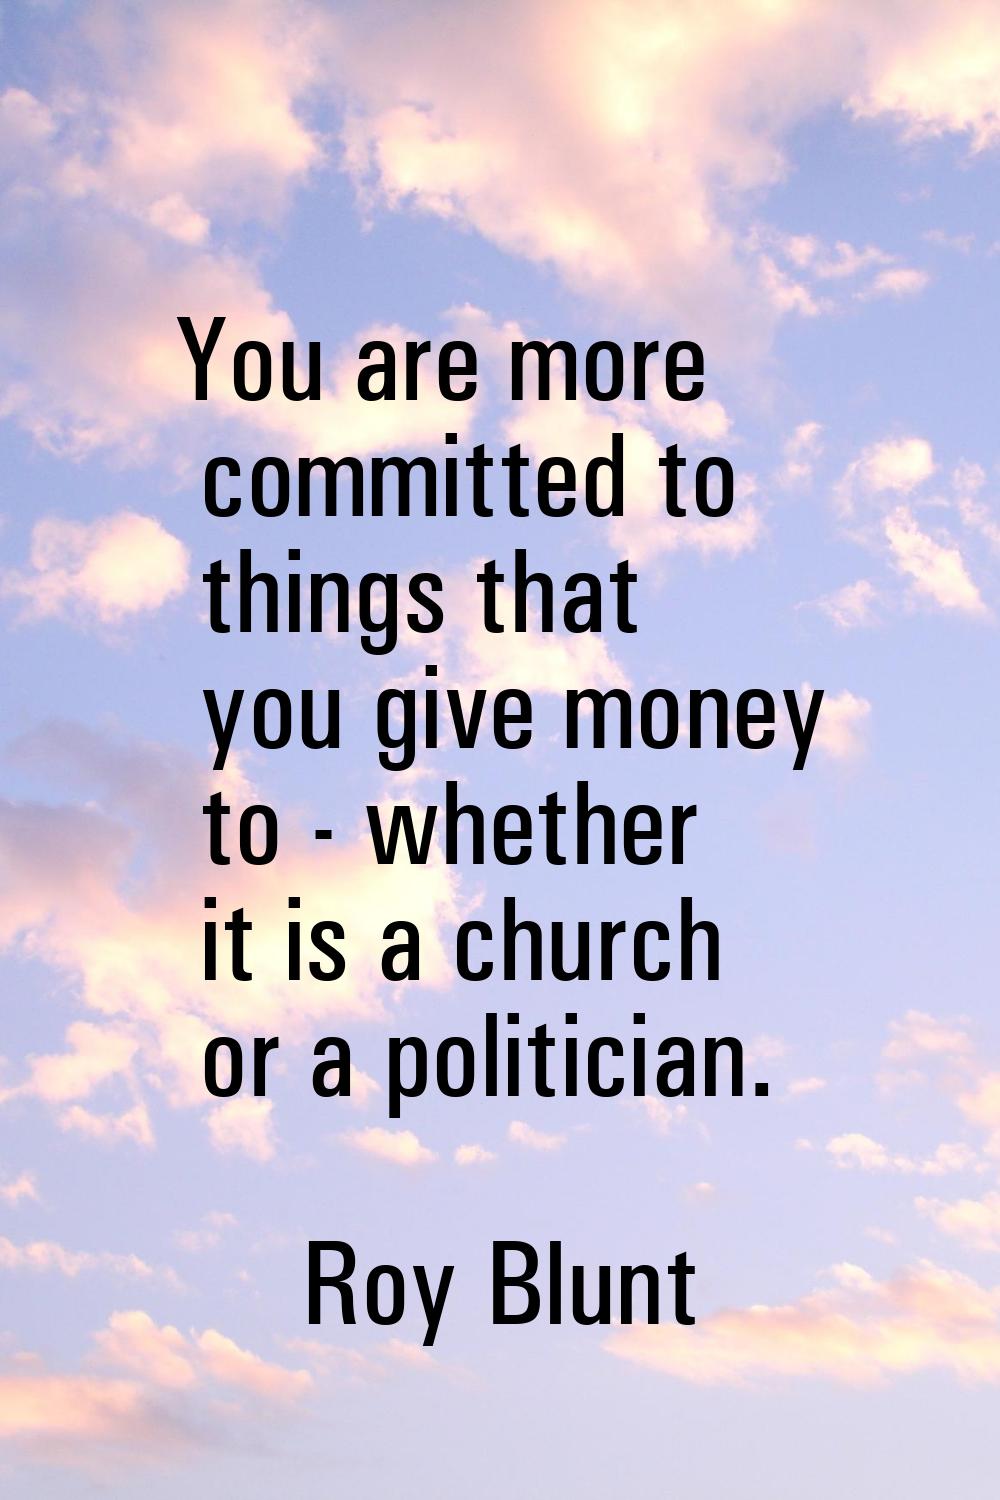 You are more committed to things that you give money to - whether it is a church or a politician.